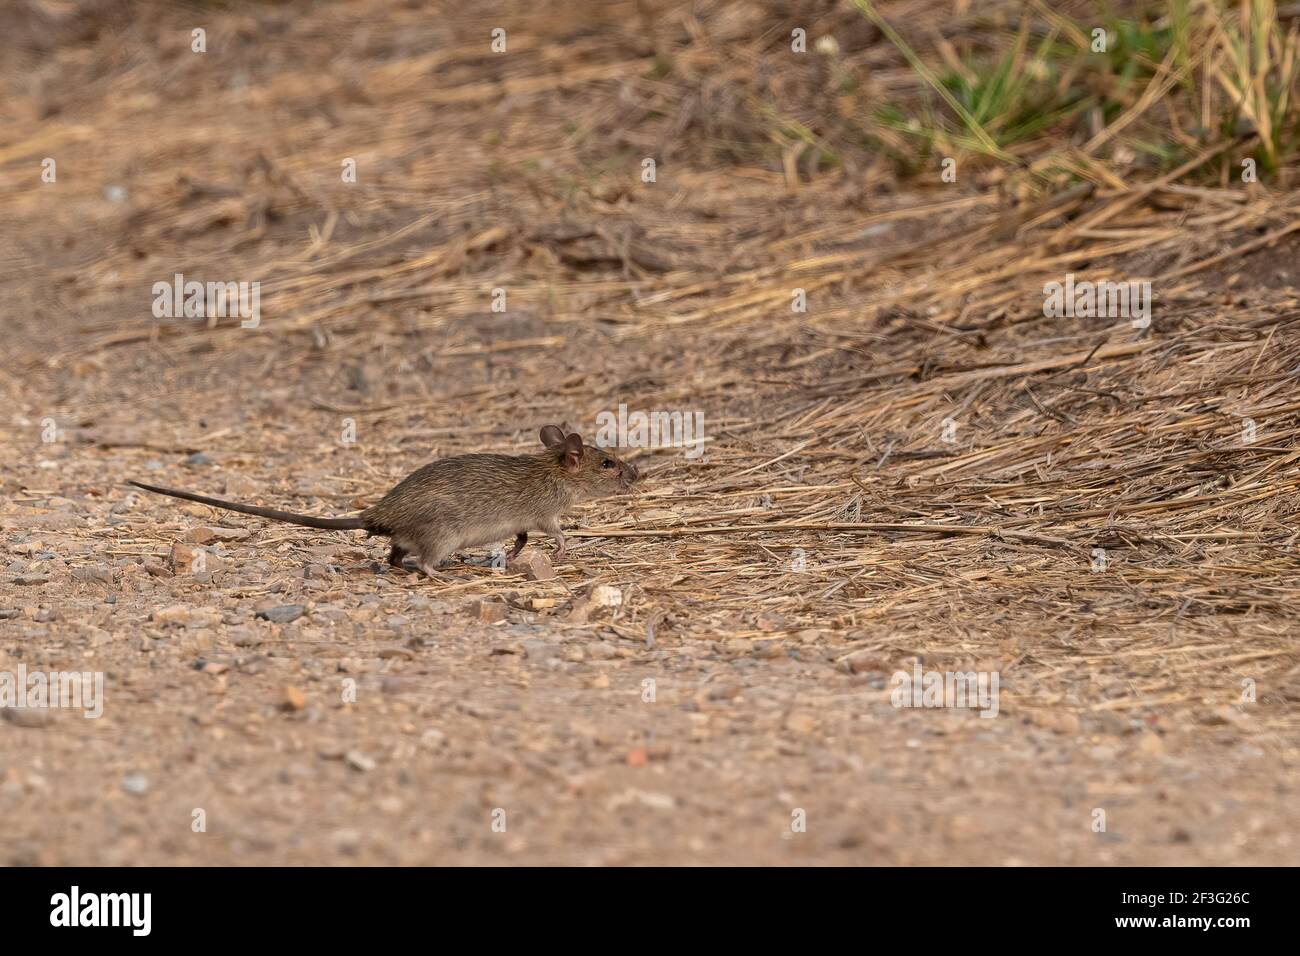 The rricefield rat (Rattus argentiventer) lives in large groups which consist of a dominant male and high ranking female. Stock Photo